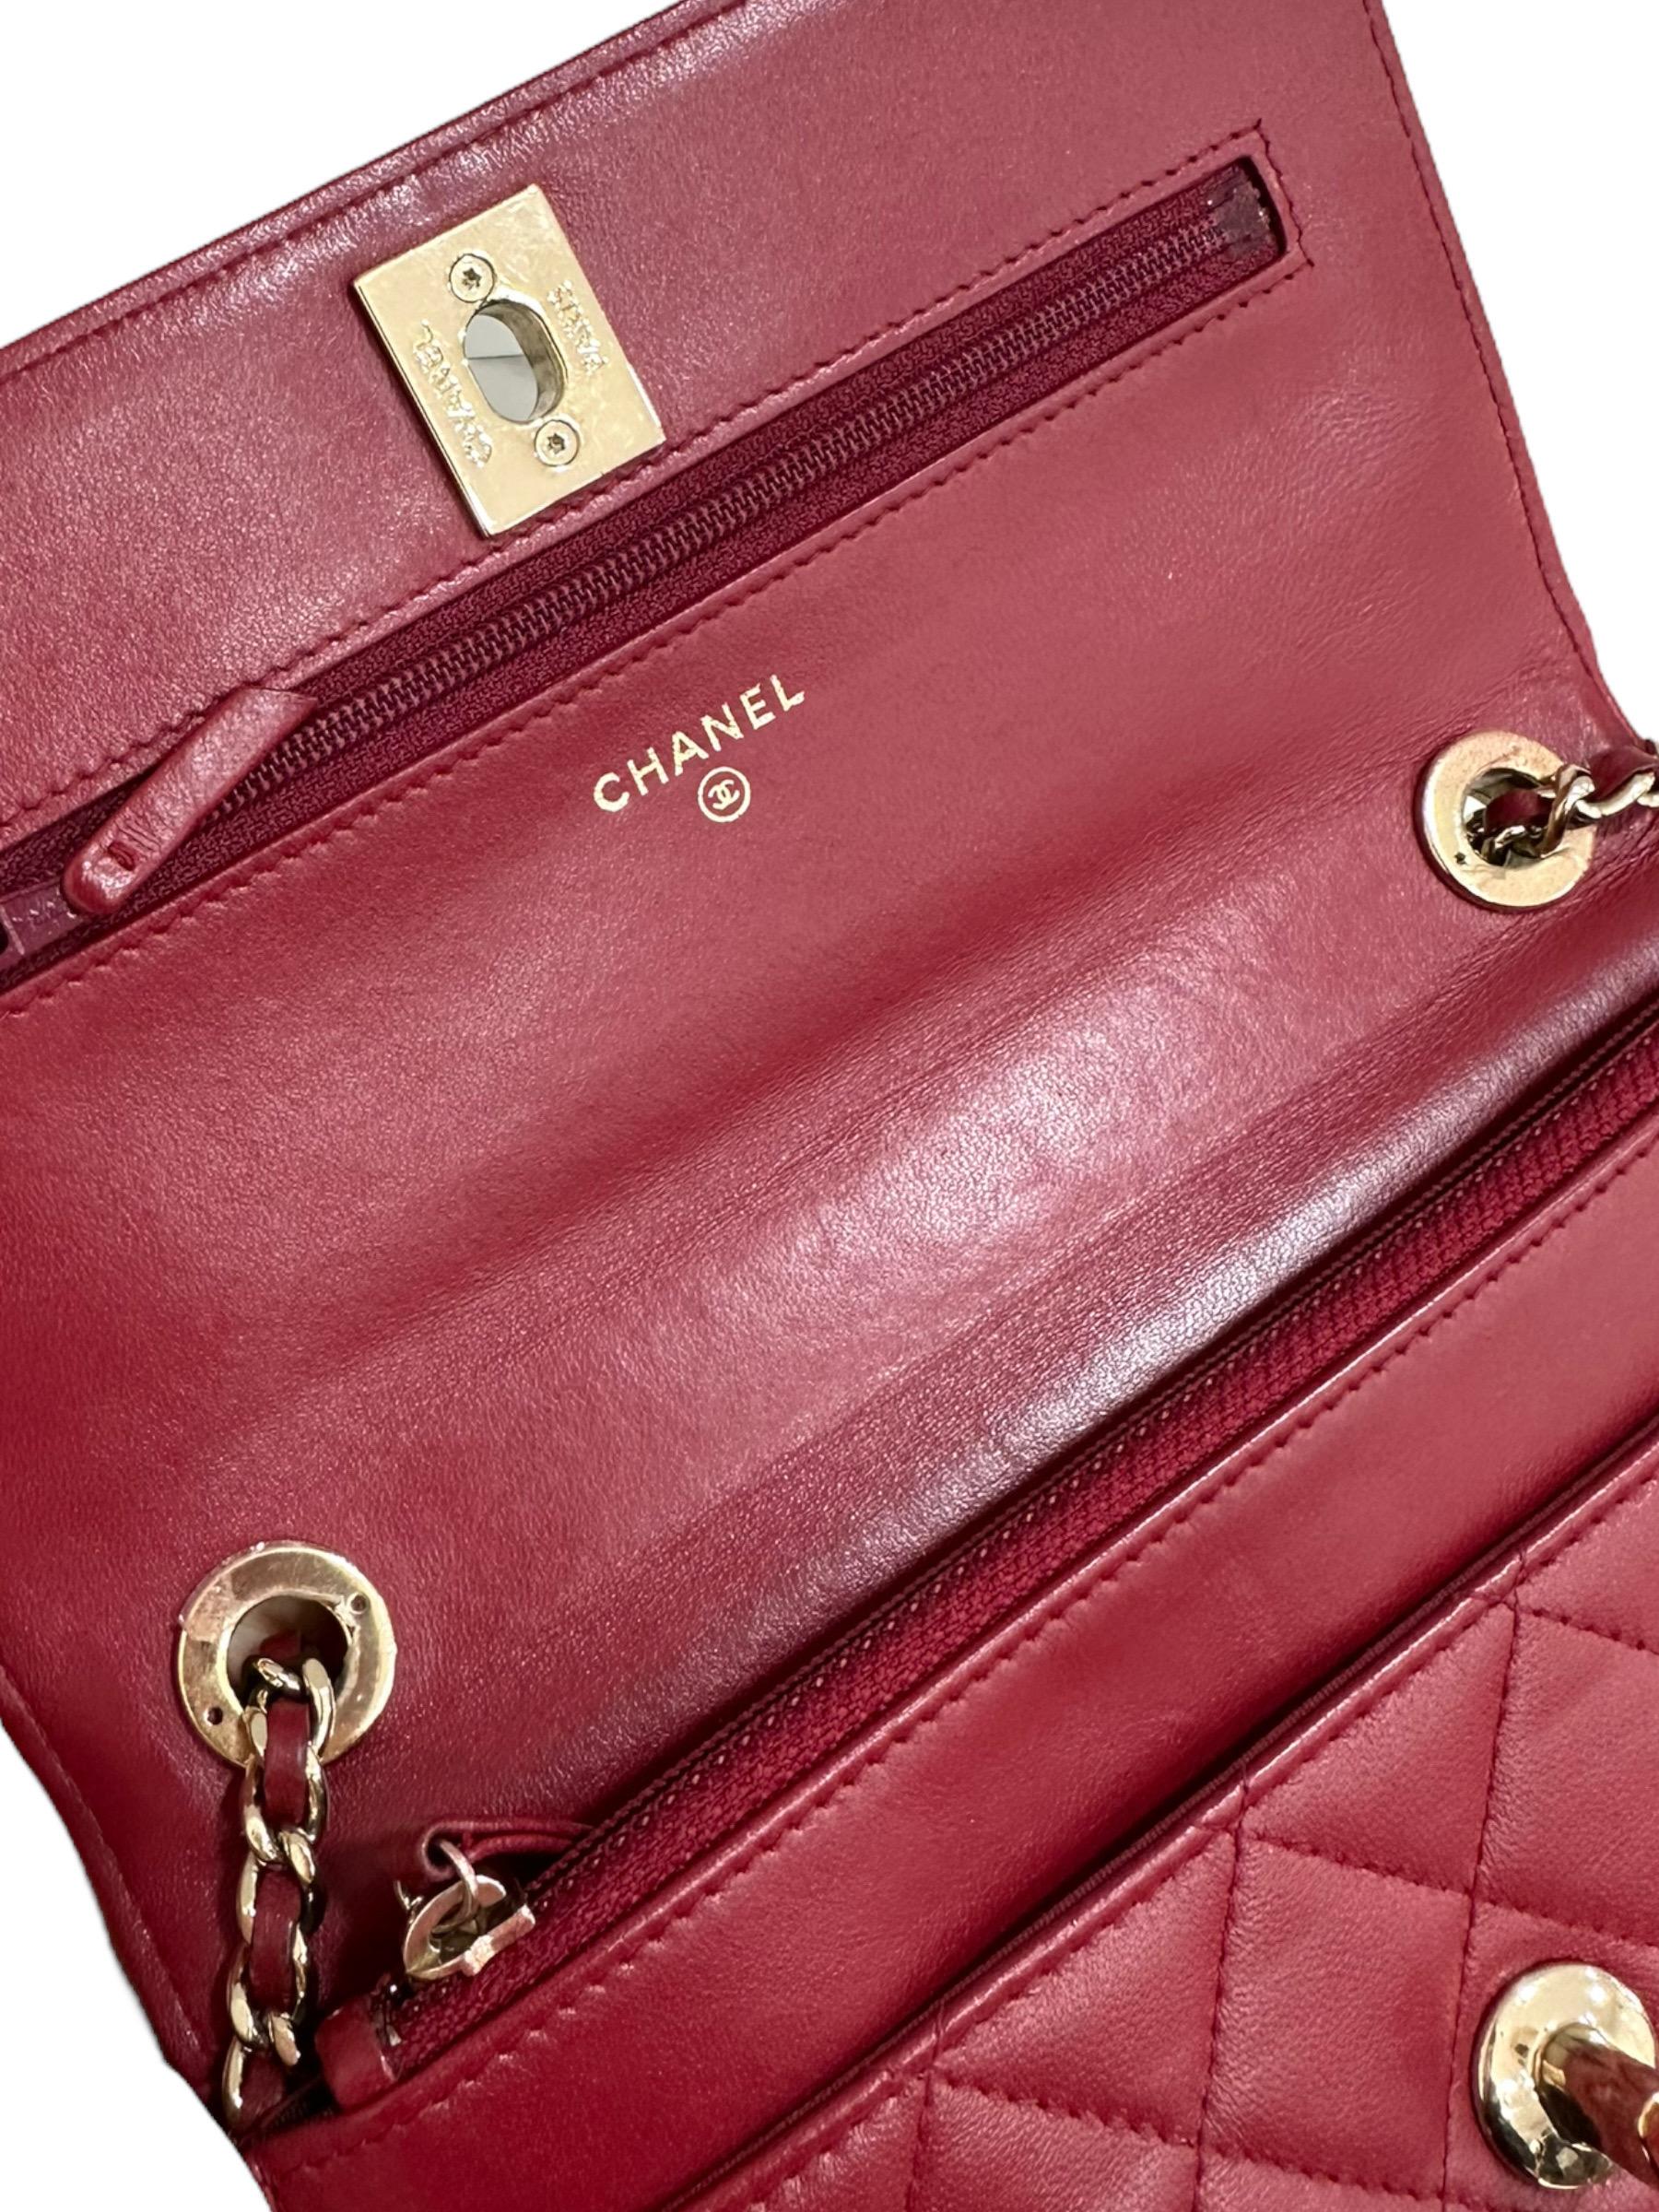 Borsa A Tracolla Chanel Wallet On Chain Rossa 2016/2017 7